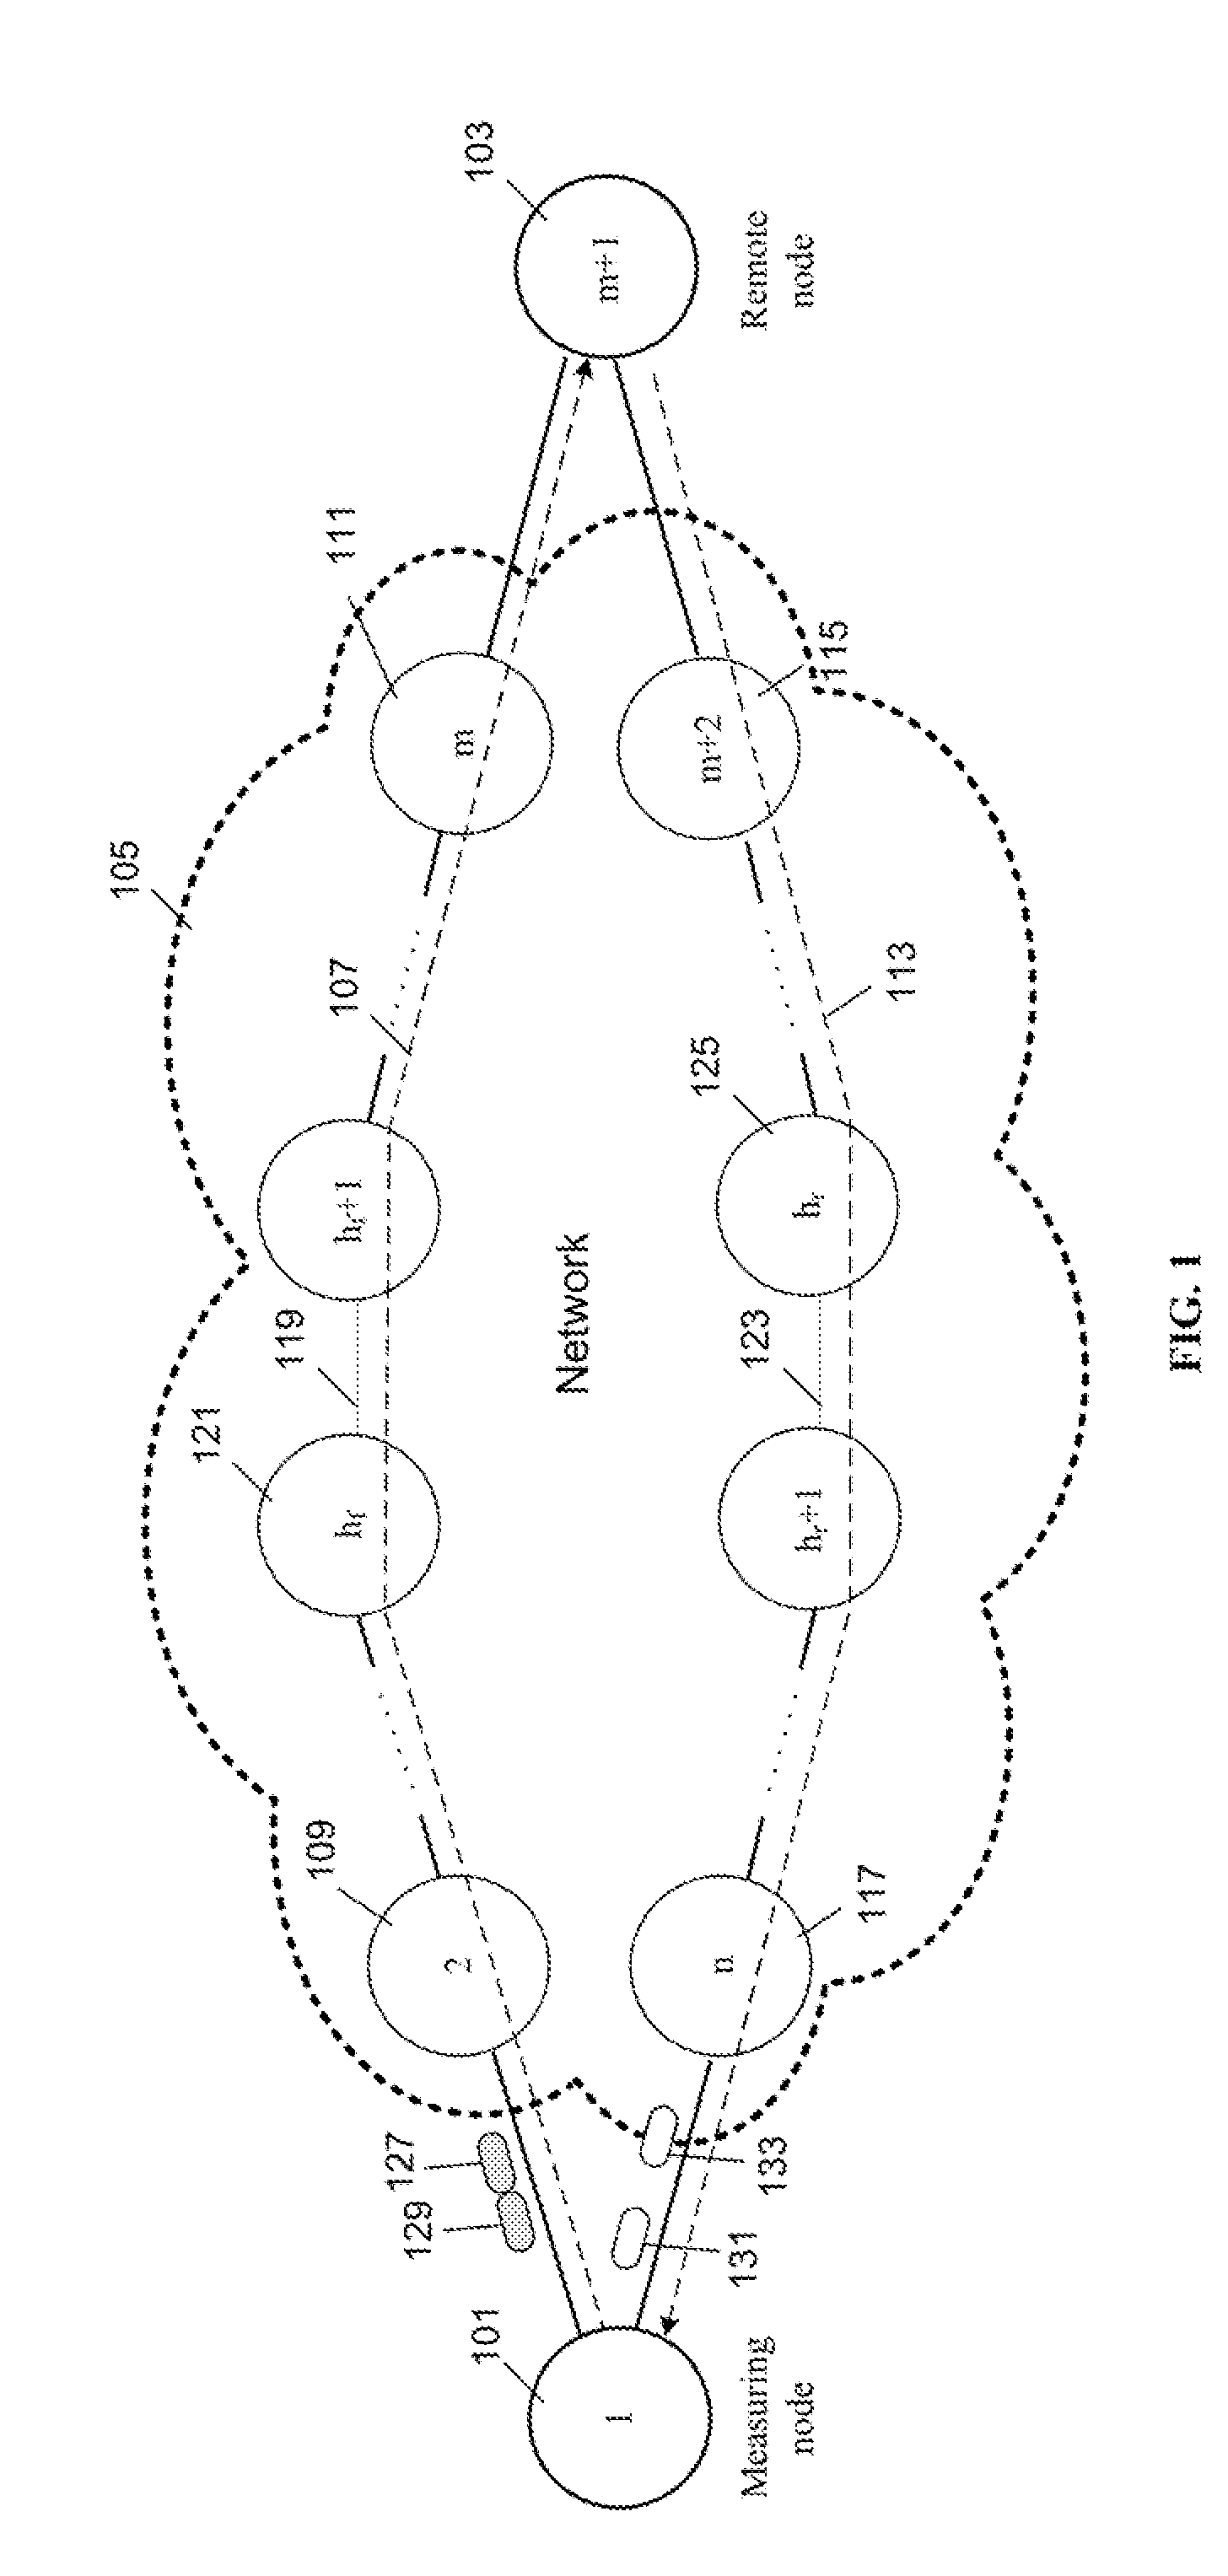 Method for measurment of network path capacity with minimum delay difference